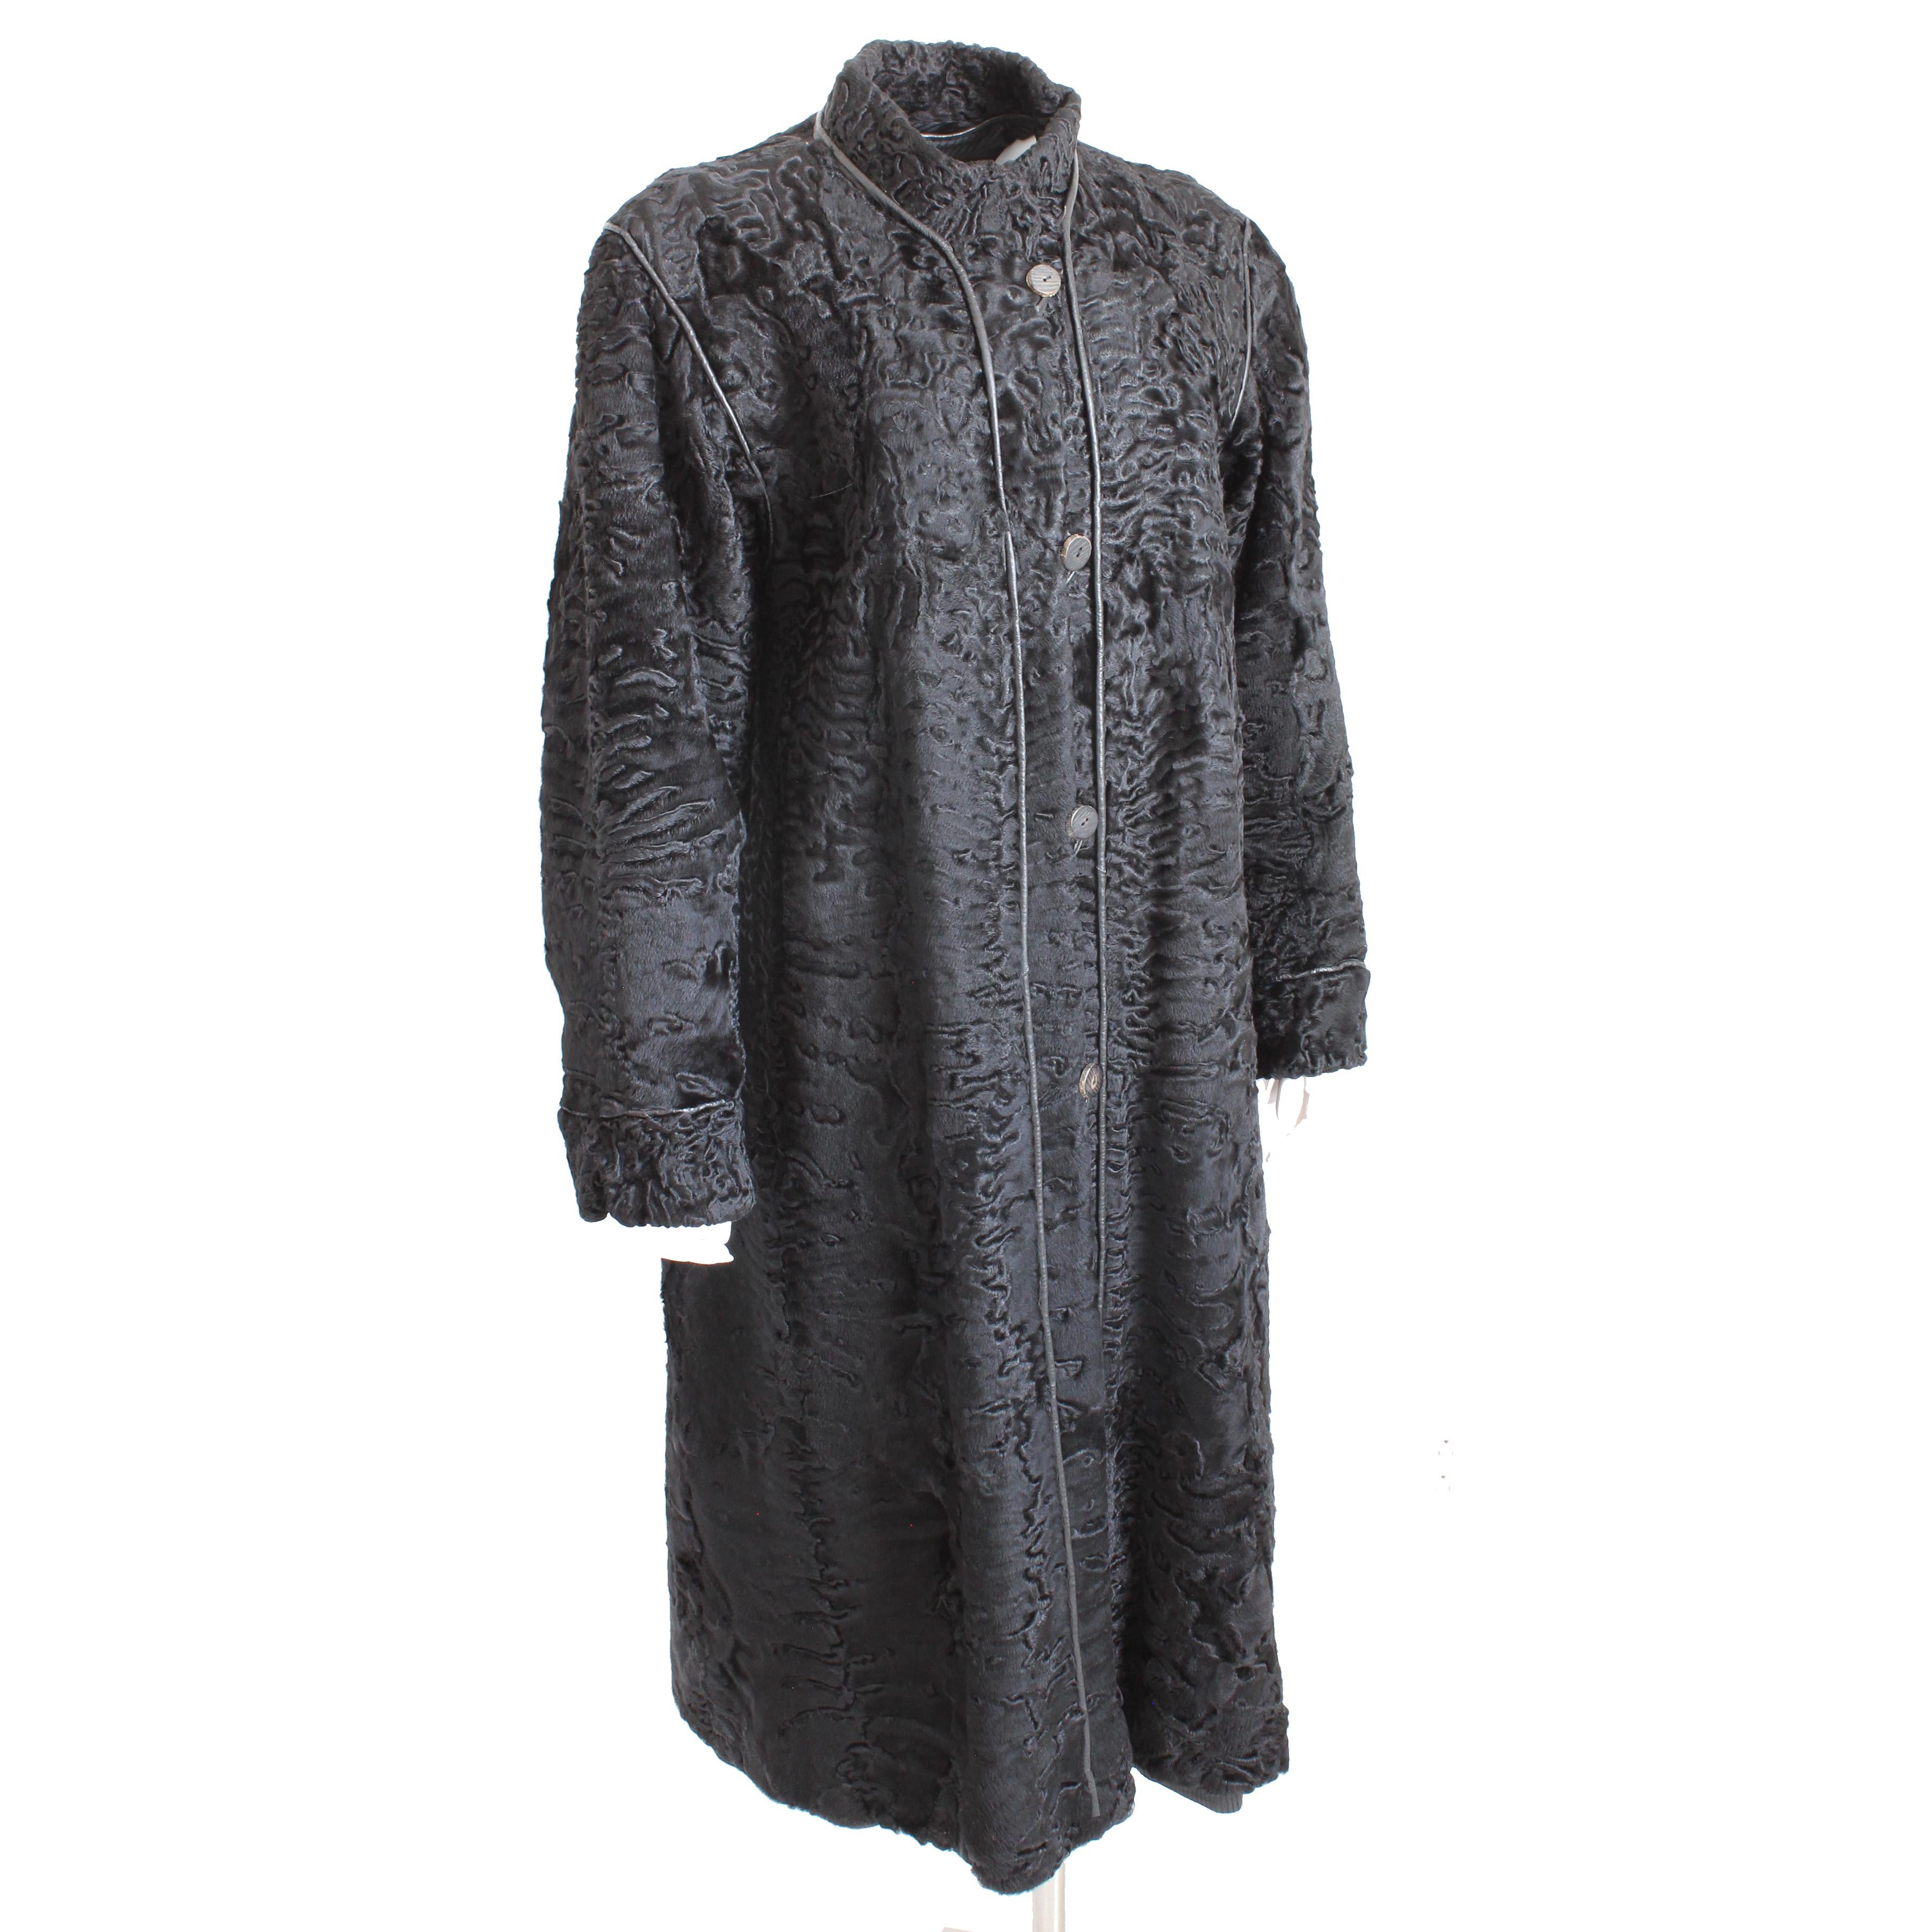 This fabulous Persian Lamb Coat was made in Finland by Turkis Tukku, most likely in the late 1970s.  Fully-lined in black satin, it also has a removable 2nd lining with pockets, and fastens with loop/buttons.  

Long and chic, this coat is perfect